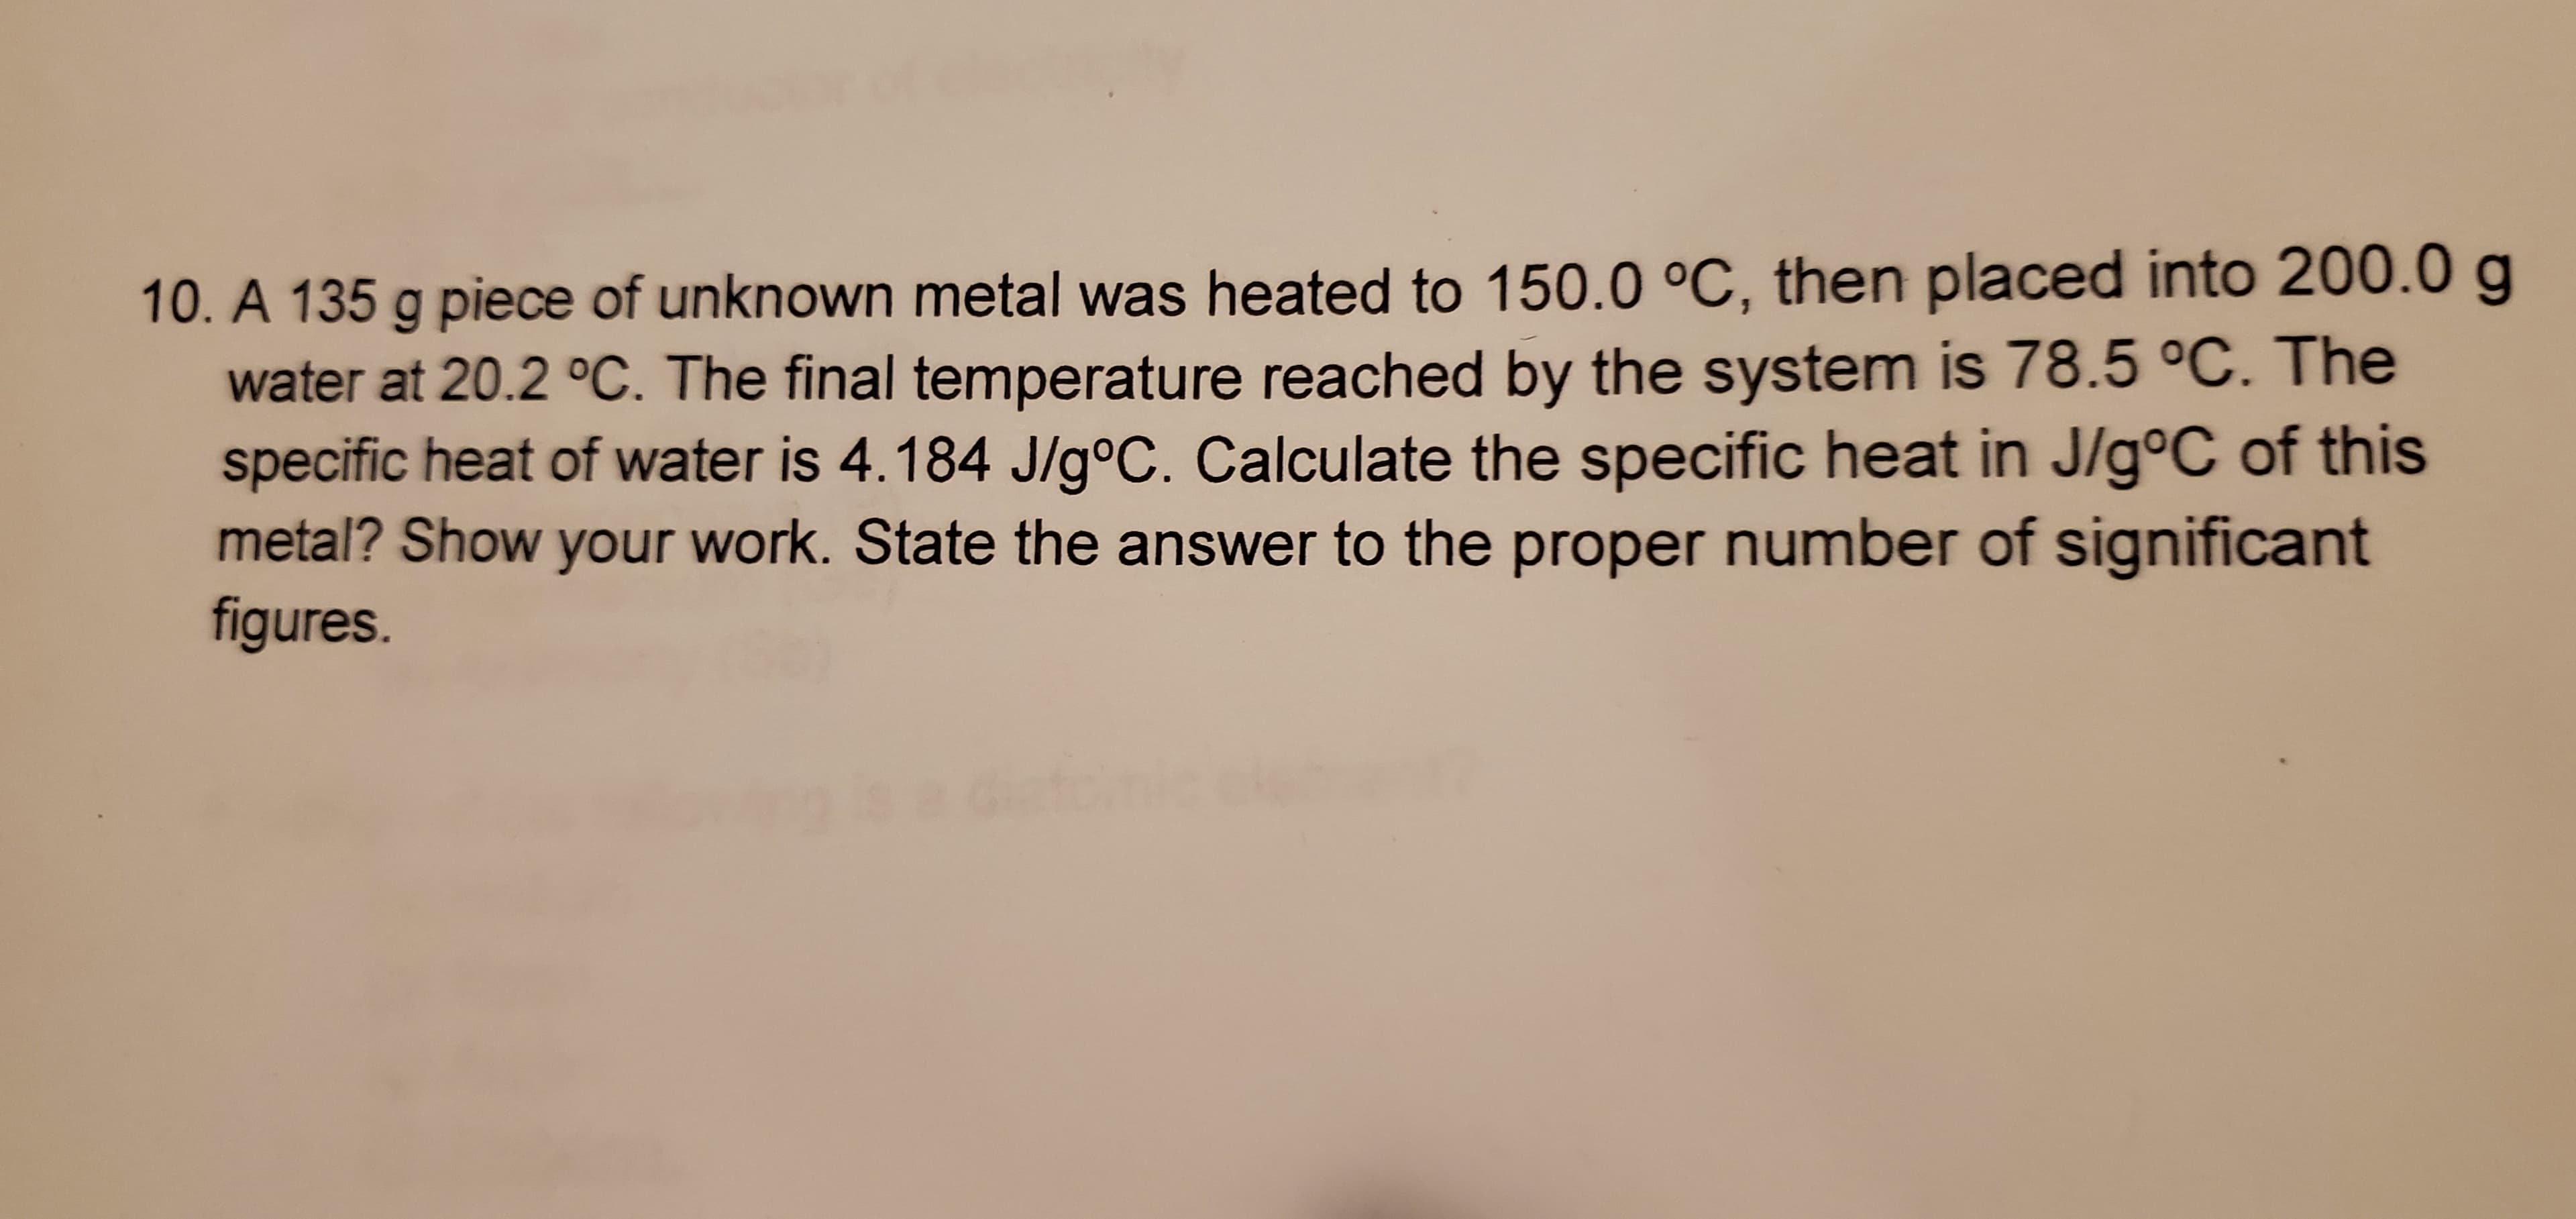 10. A 135 g piece of unknown metal was heated to 150.0 °C, then placed into 200.0 g
water at 20.2 °C. The final temperature reached by the system is 78.5 °C. The
specific heat of water is 4.184 J/g°C. Calculate the specific heat in J/g°C of this
metal? Show your work. State the answer to the proper number of significant
figures.
